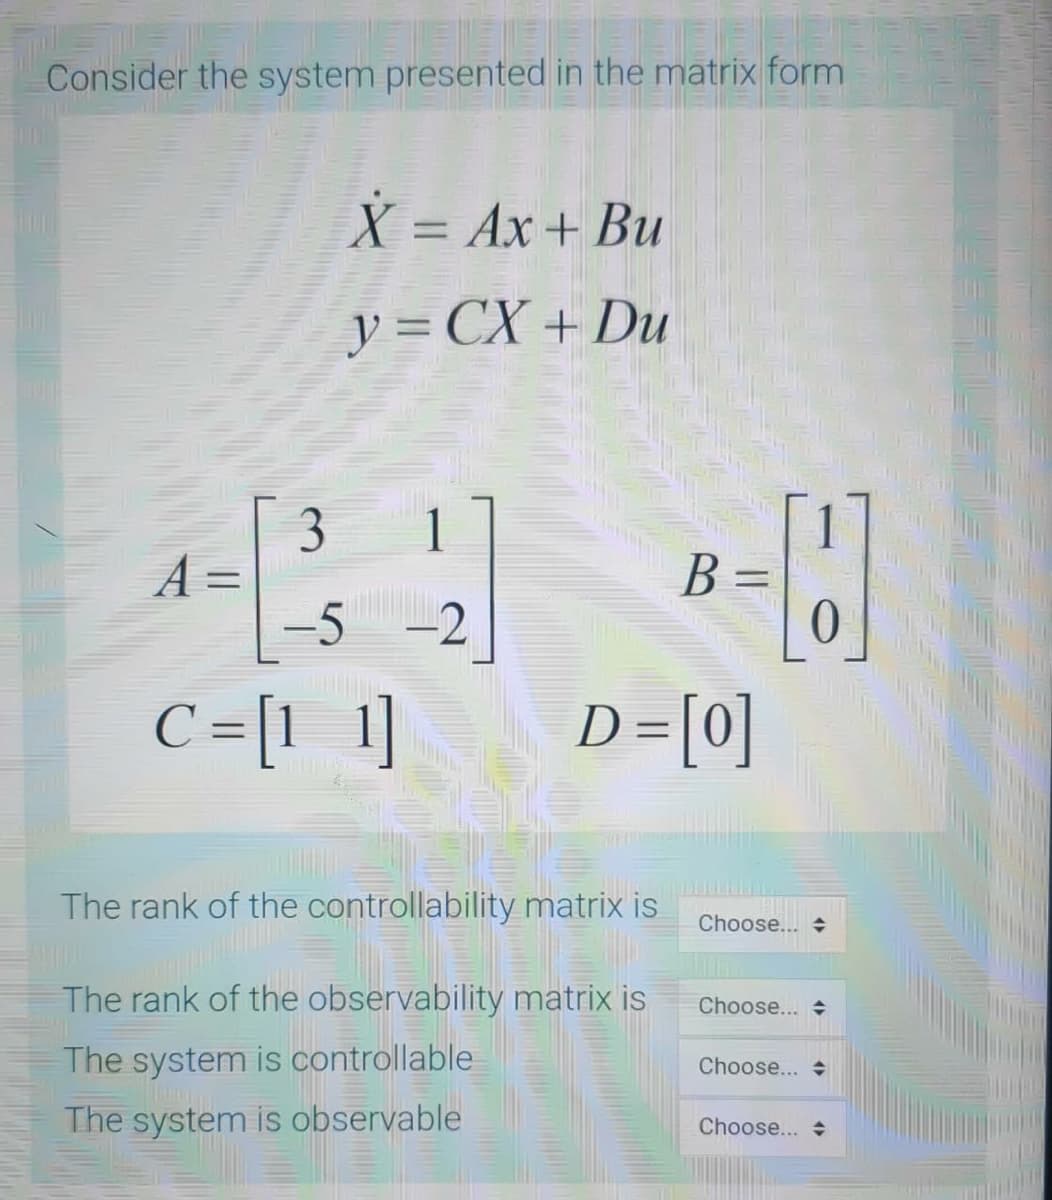 Consider the system presented in the matrix form
X = Ax + Bu
%3D
y = CX + Du
B =
%3D
-5 -2
C =[1 1]
D=[0]
%3D
%3D
The rank of the controllability matrix is
Choose... +
The rank of the observability matrix is
Choose...
The system is controllable
Choose...
The system is observable
Choose...
